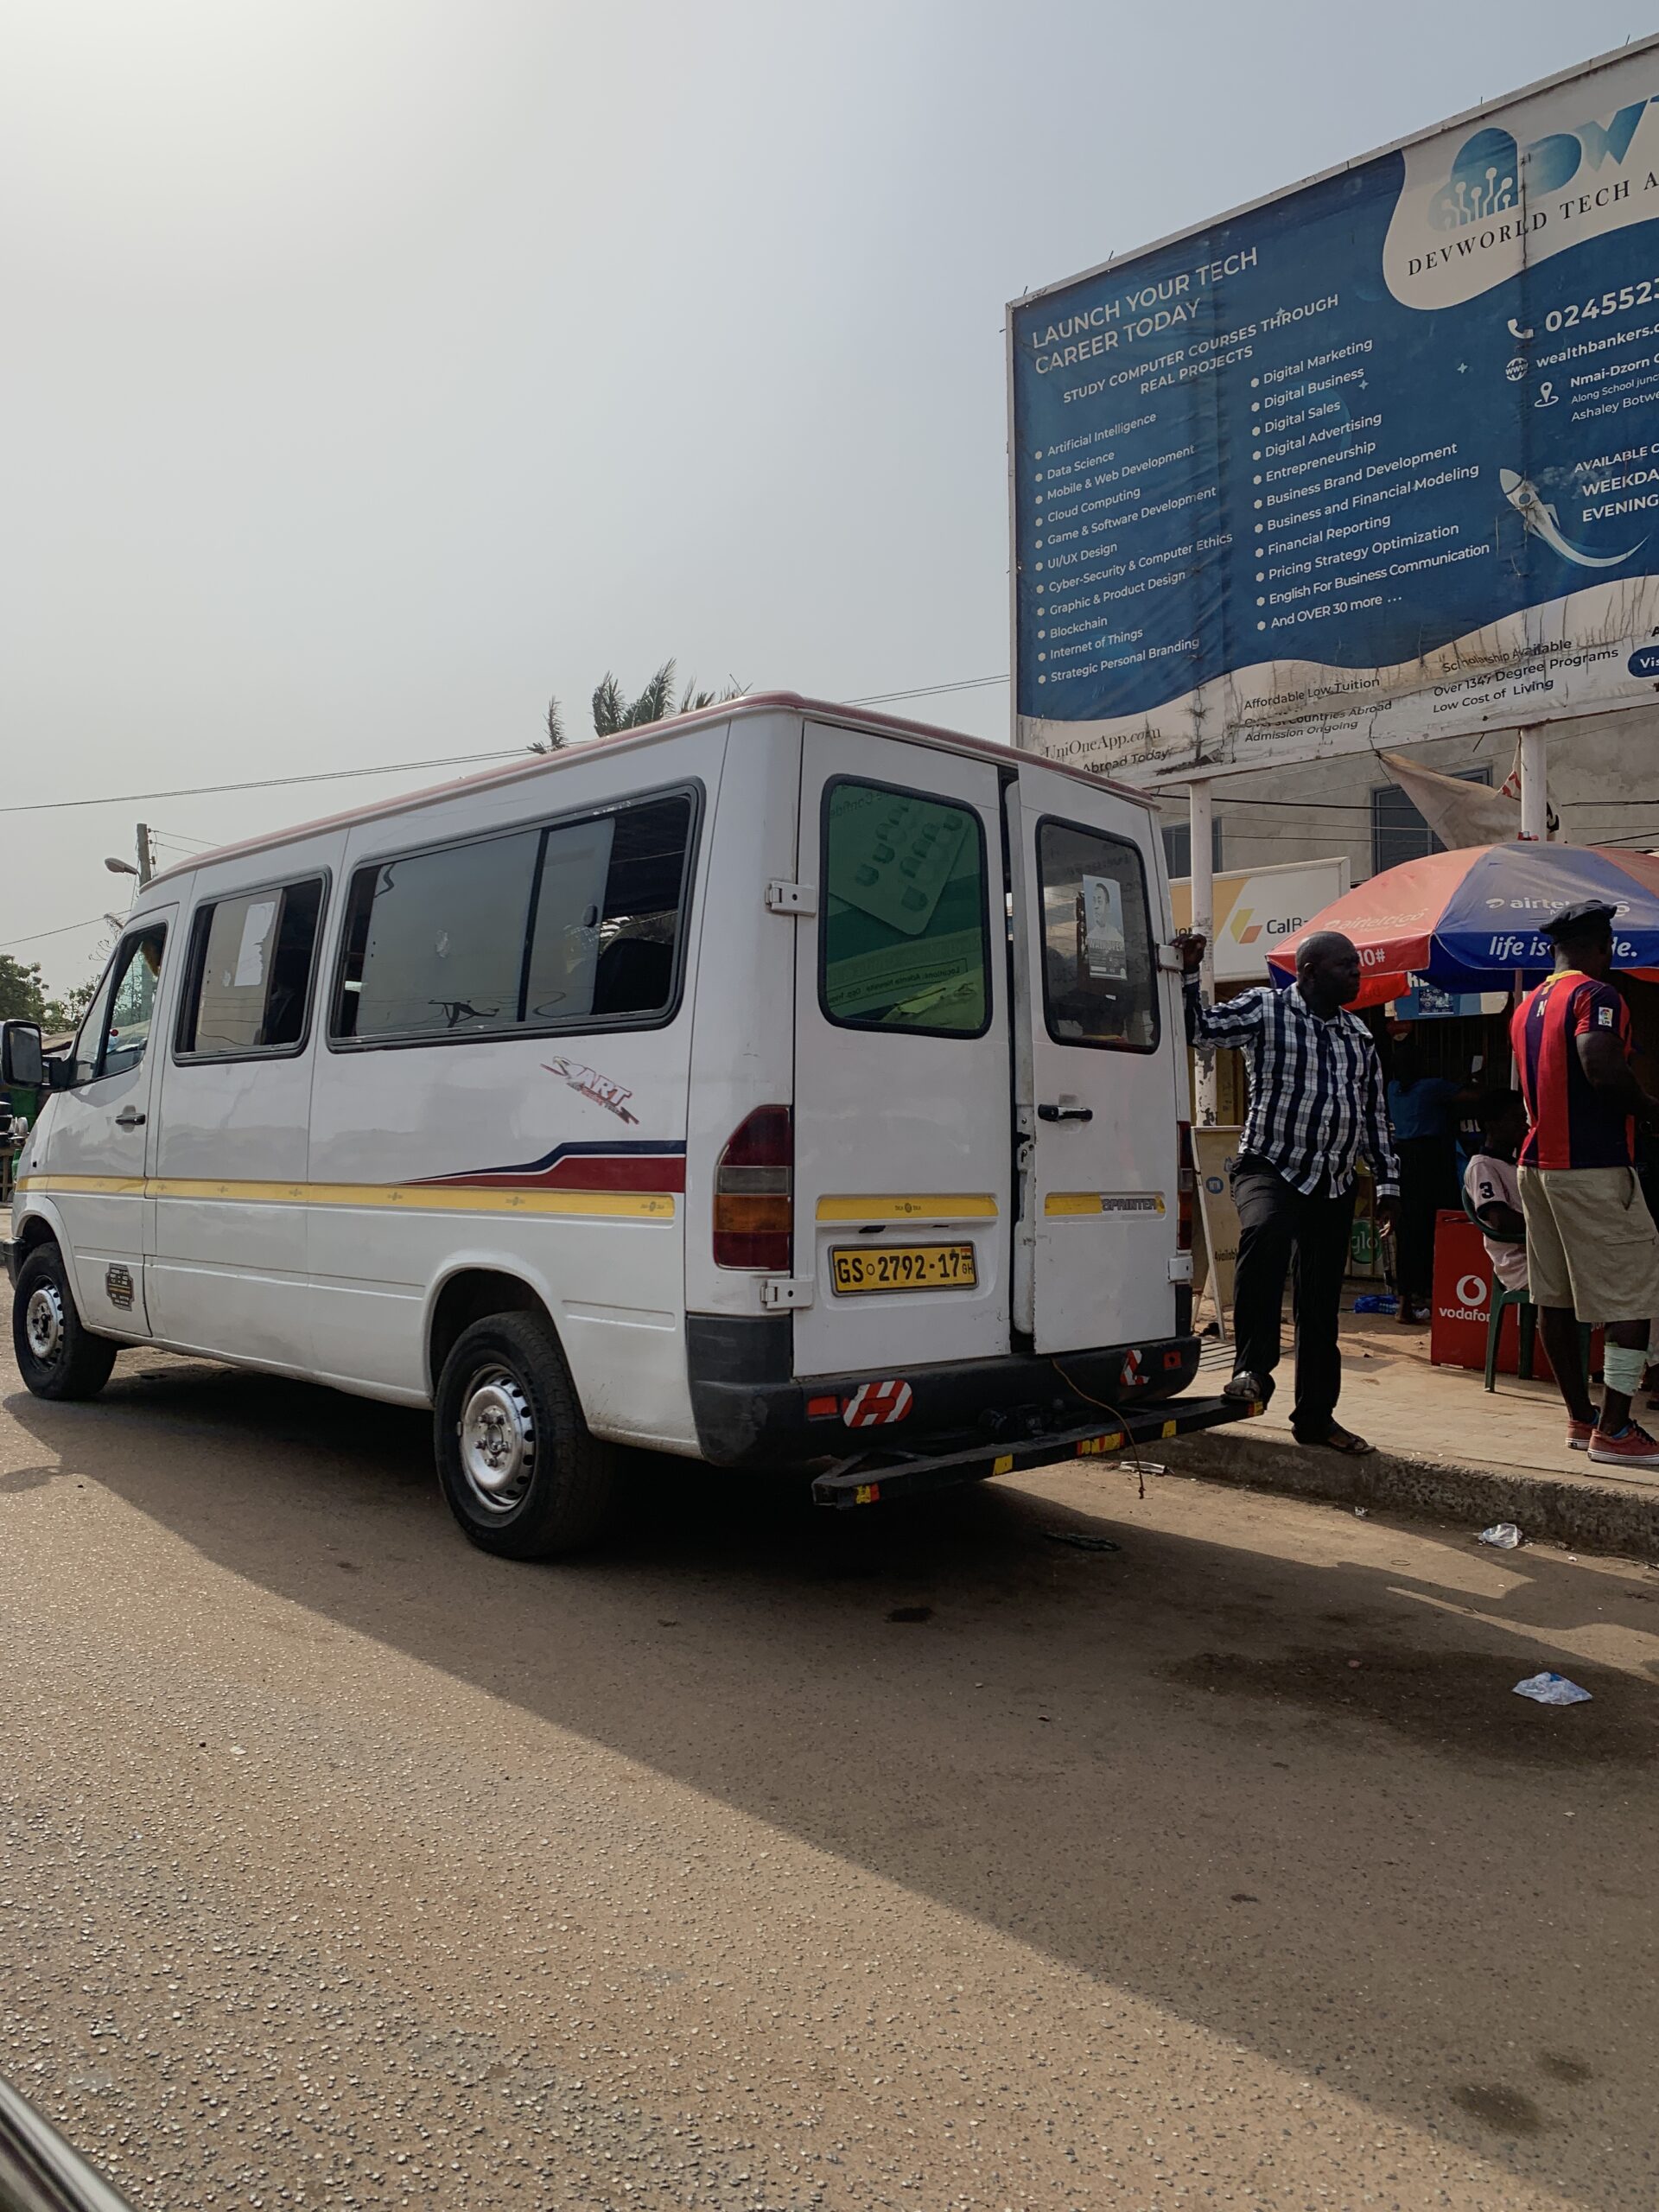 A white tro tro passing on the streets in Accra.